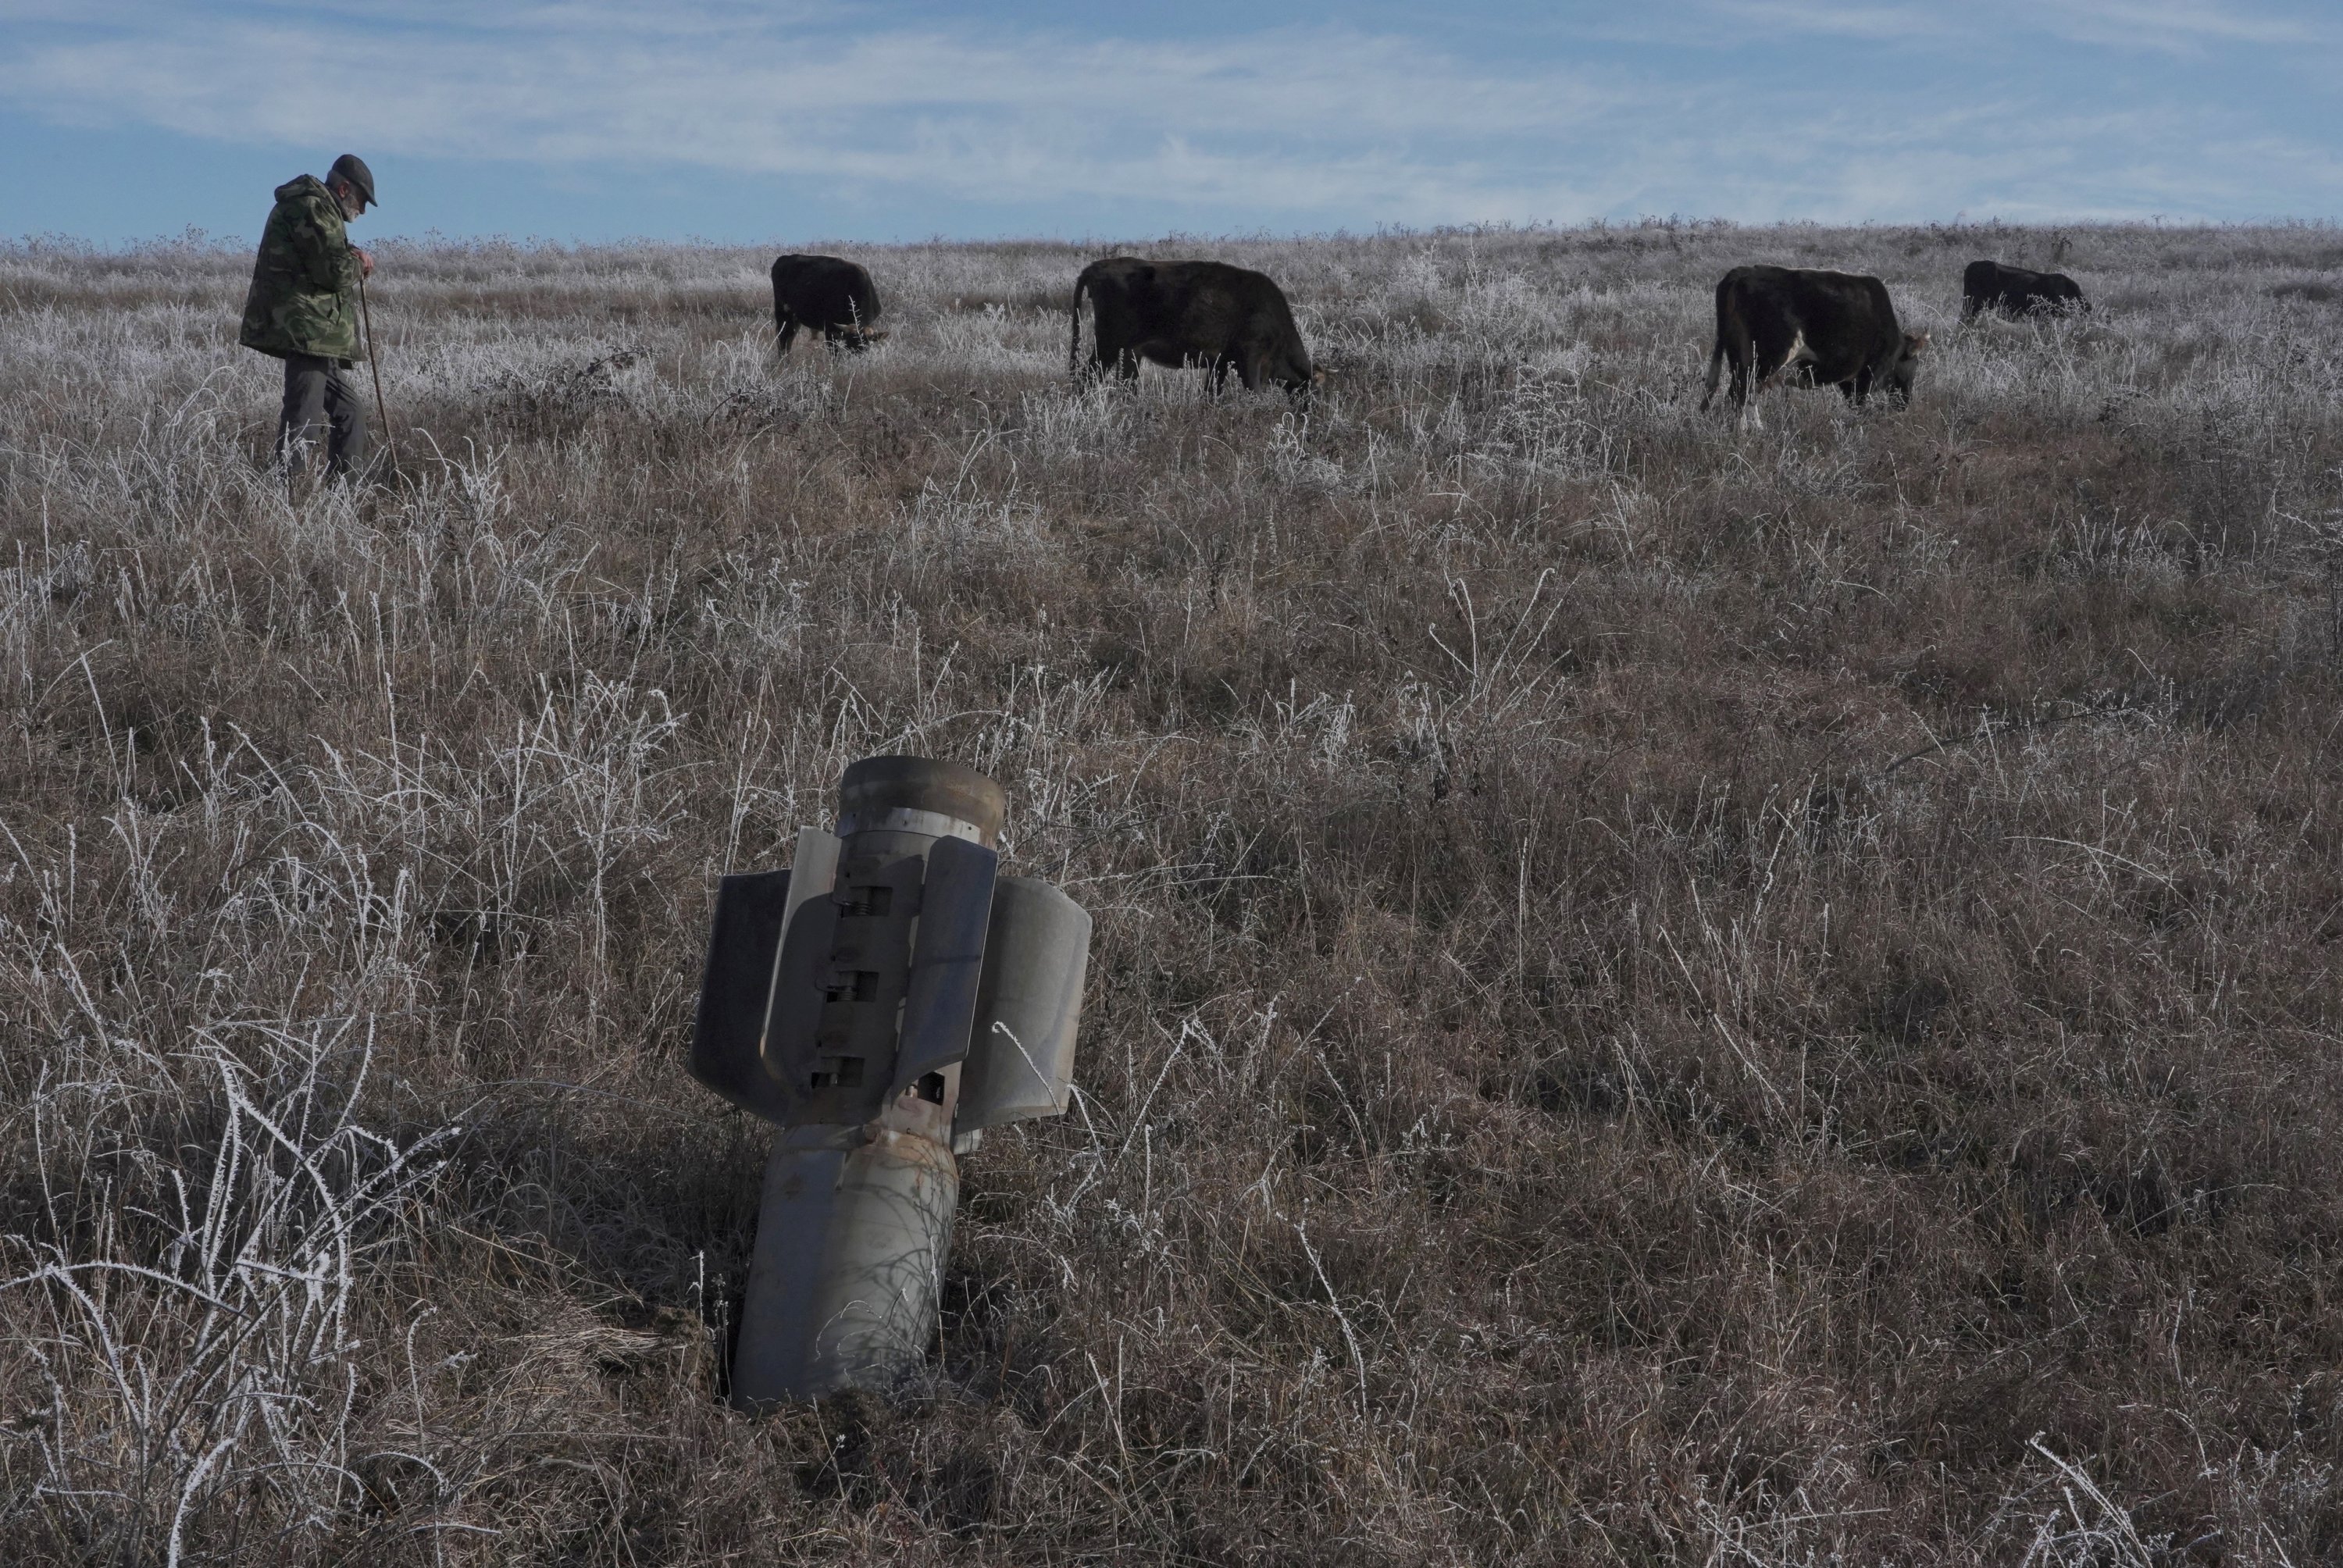 A man shepherds his cows near a rocket case left after a military conflict in the Nagorno-Karabakh region, outside Stepanakert, Azerbaijan, Jan. 6, 2021. (REUTERS)